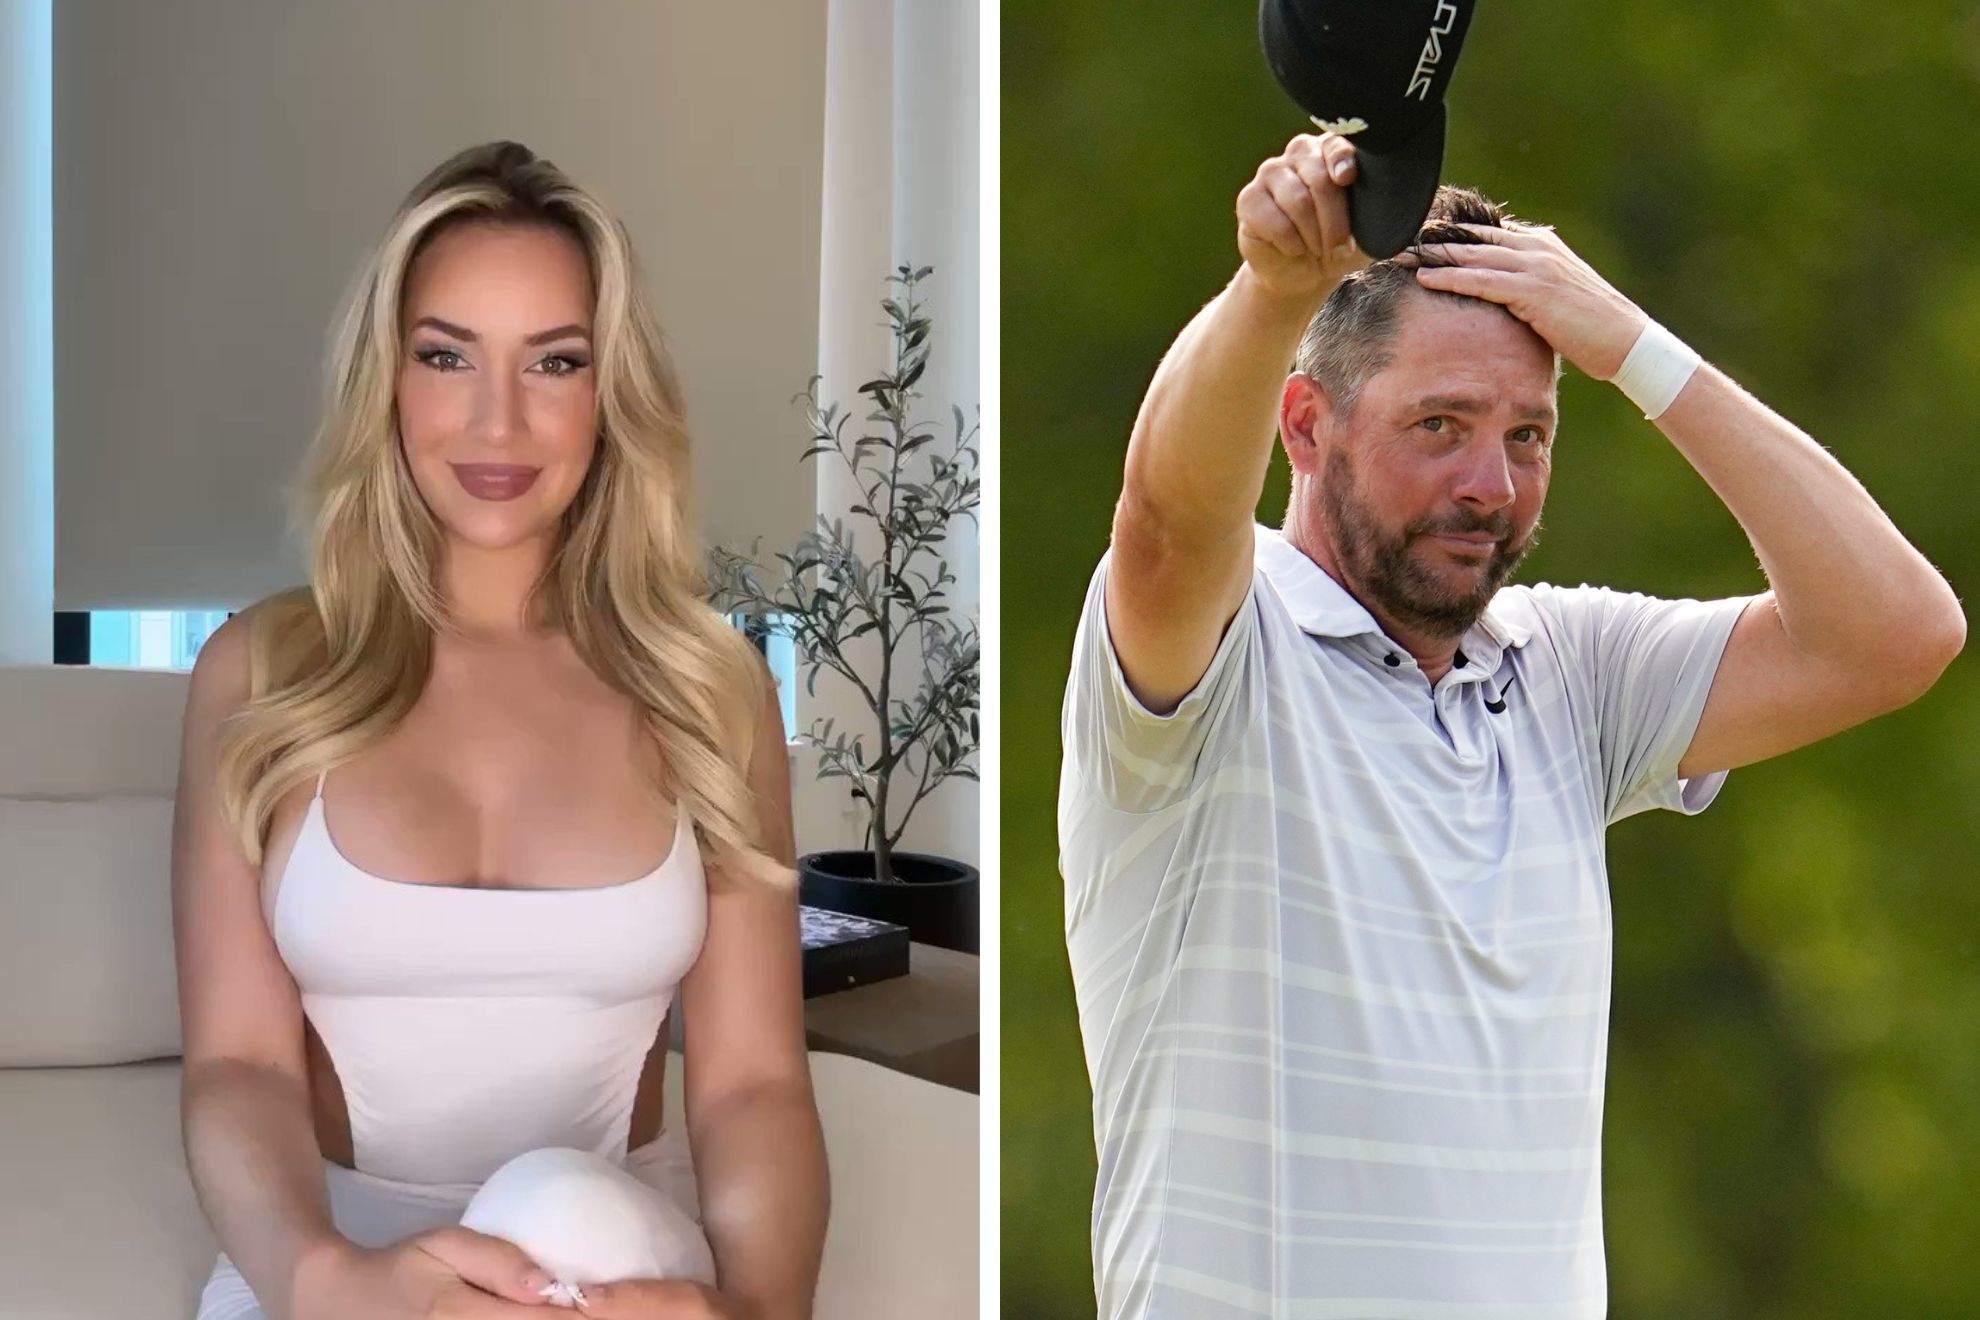 Paige Spiranac with the cherry on top for club pro Michael Block after PGA Championship